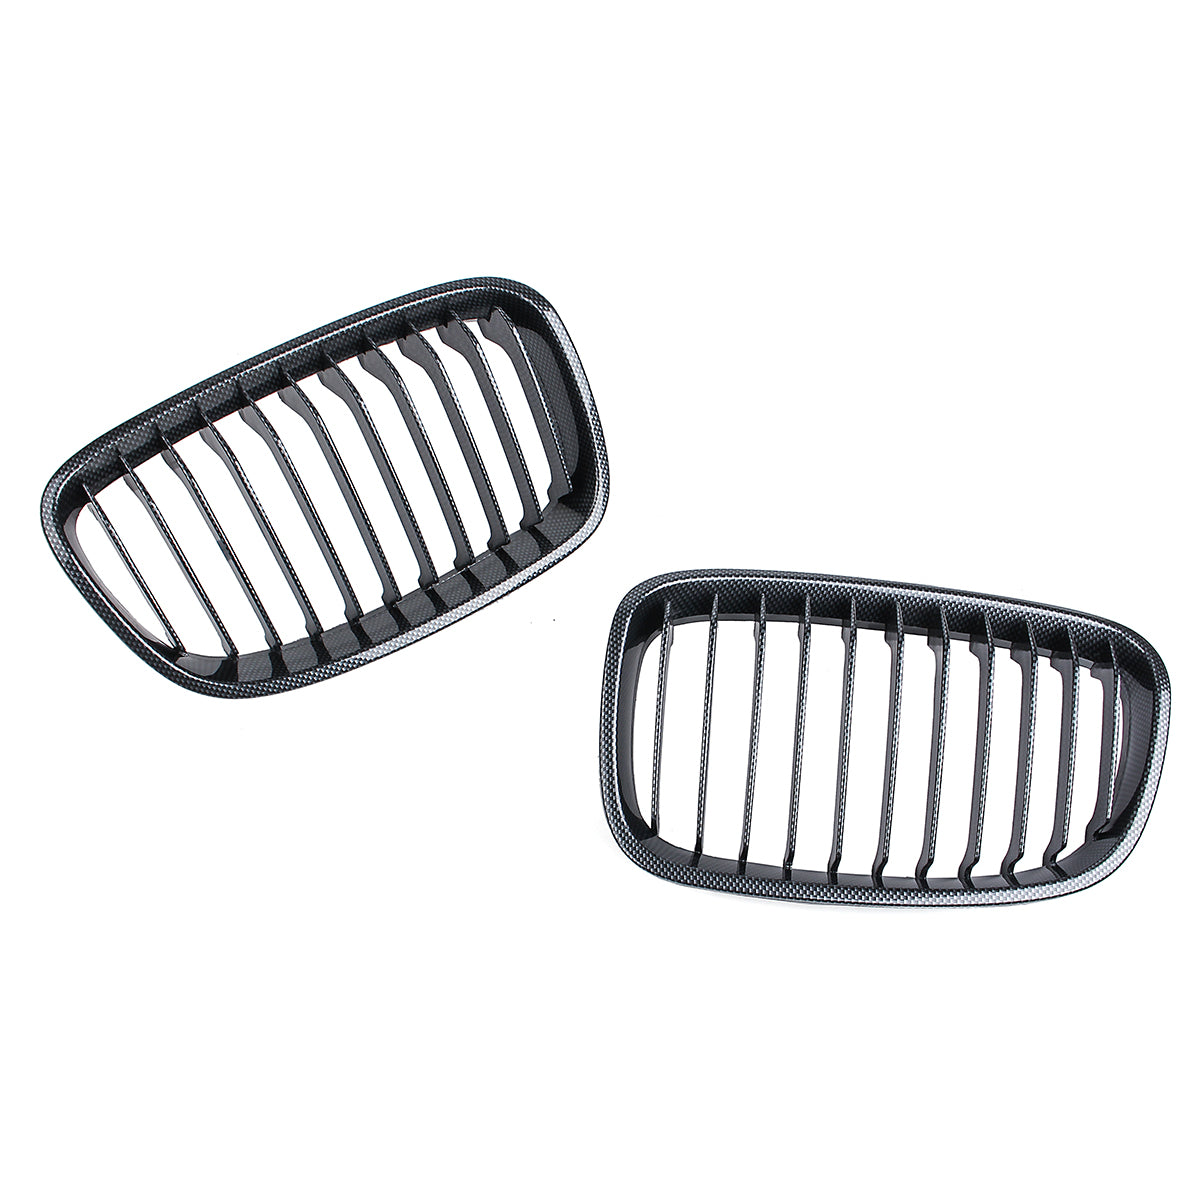 Dim Gray Pair Carbon Fiber ABS Front Kidney Grille For BMW F20 F21 2011-2014